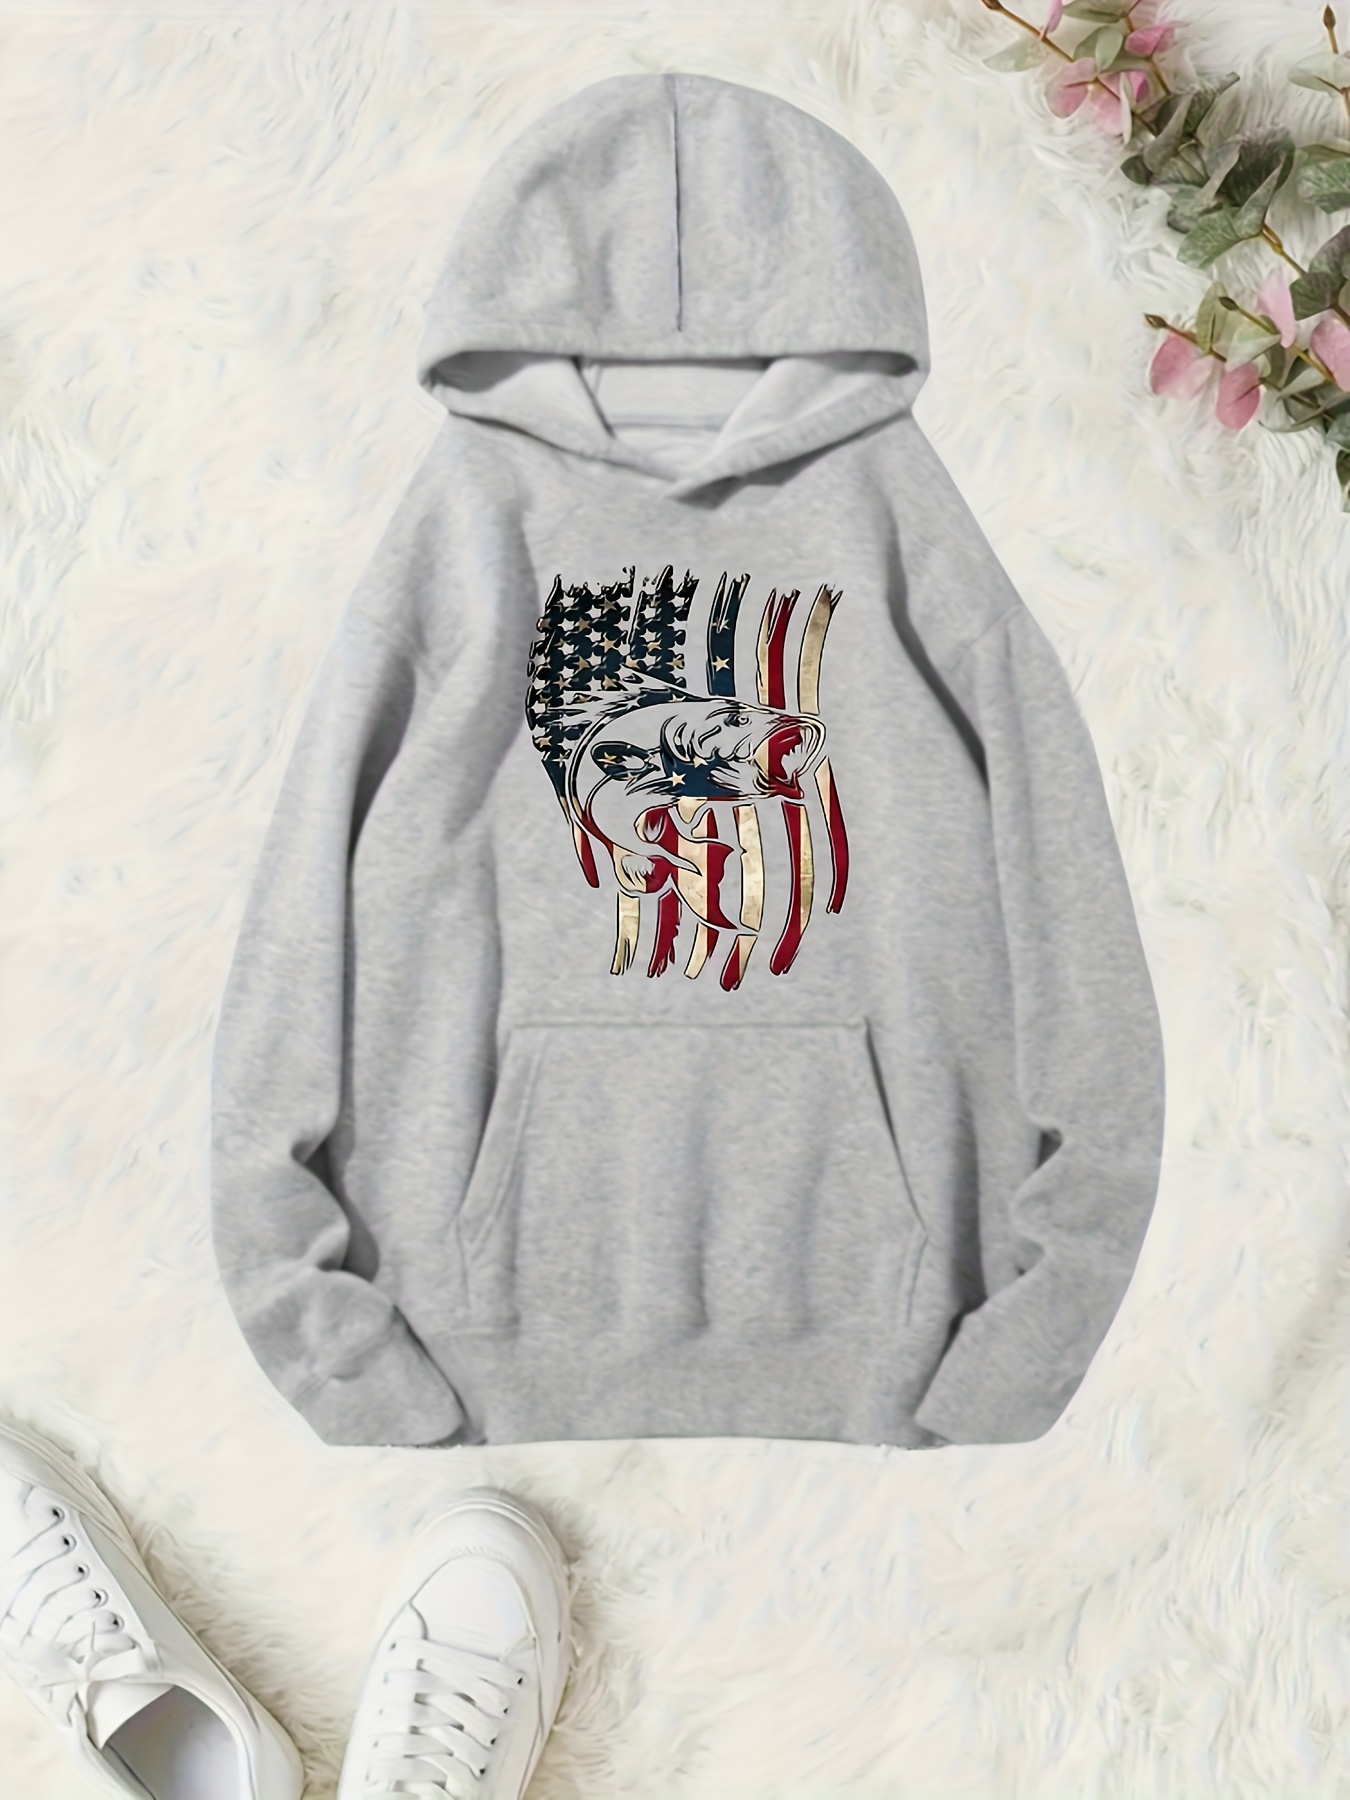 Flag And Fish Print Boys Casual Pullover Long Sleeve Hoodies, Boys Sweatshirt For Spring Fall, Kids Hoodie Tops Outdoor